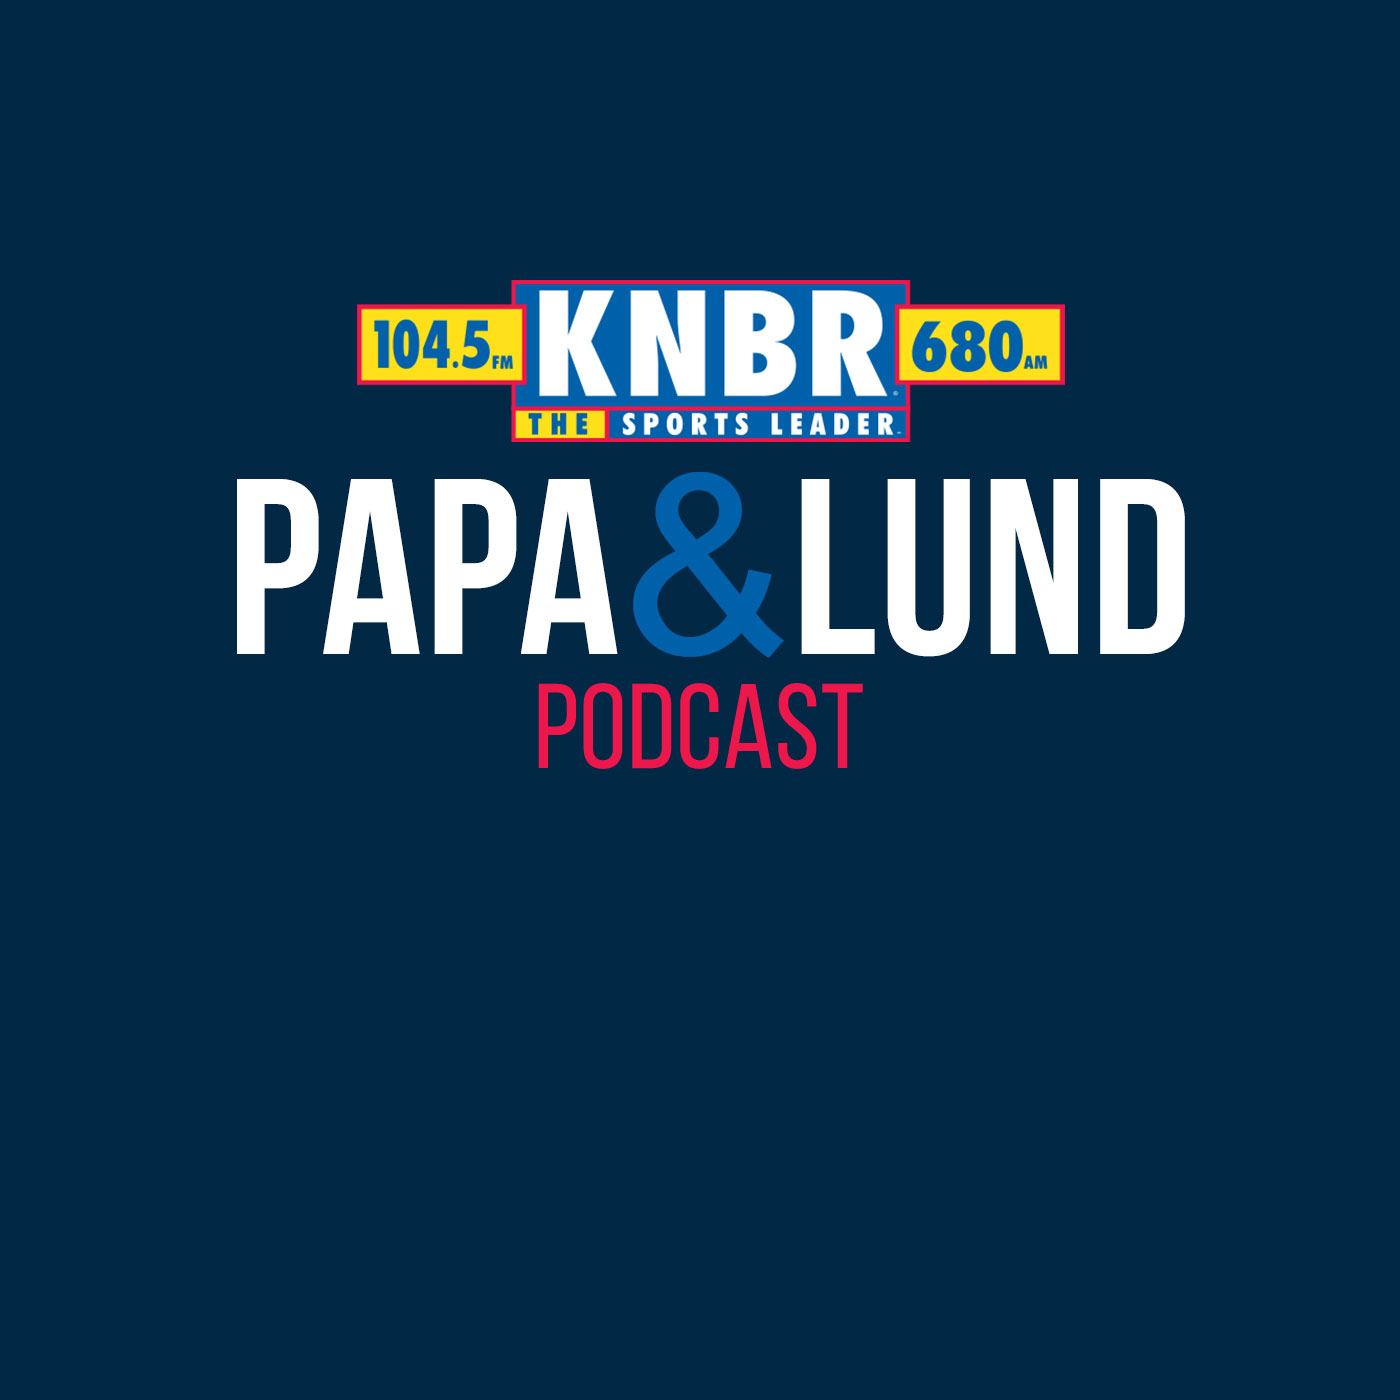 11-8 Papa & Lund debate the possibility of Shohei Ohtani joining the Giants and if it would be wise for the Giants to break the bank to finally bring in a Superstar